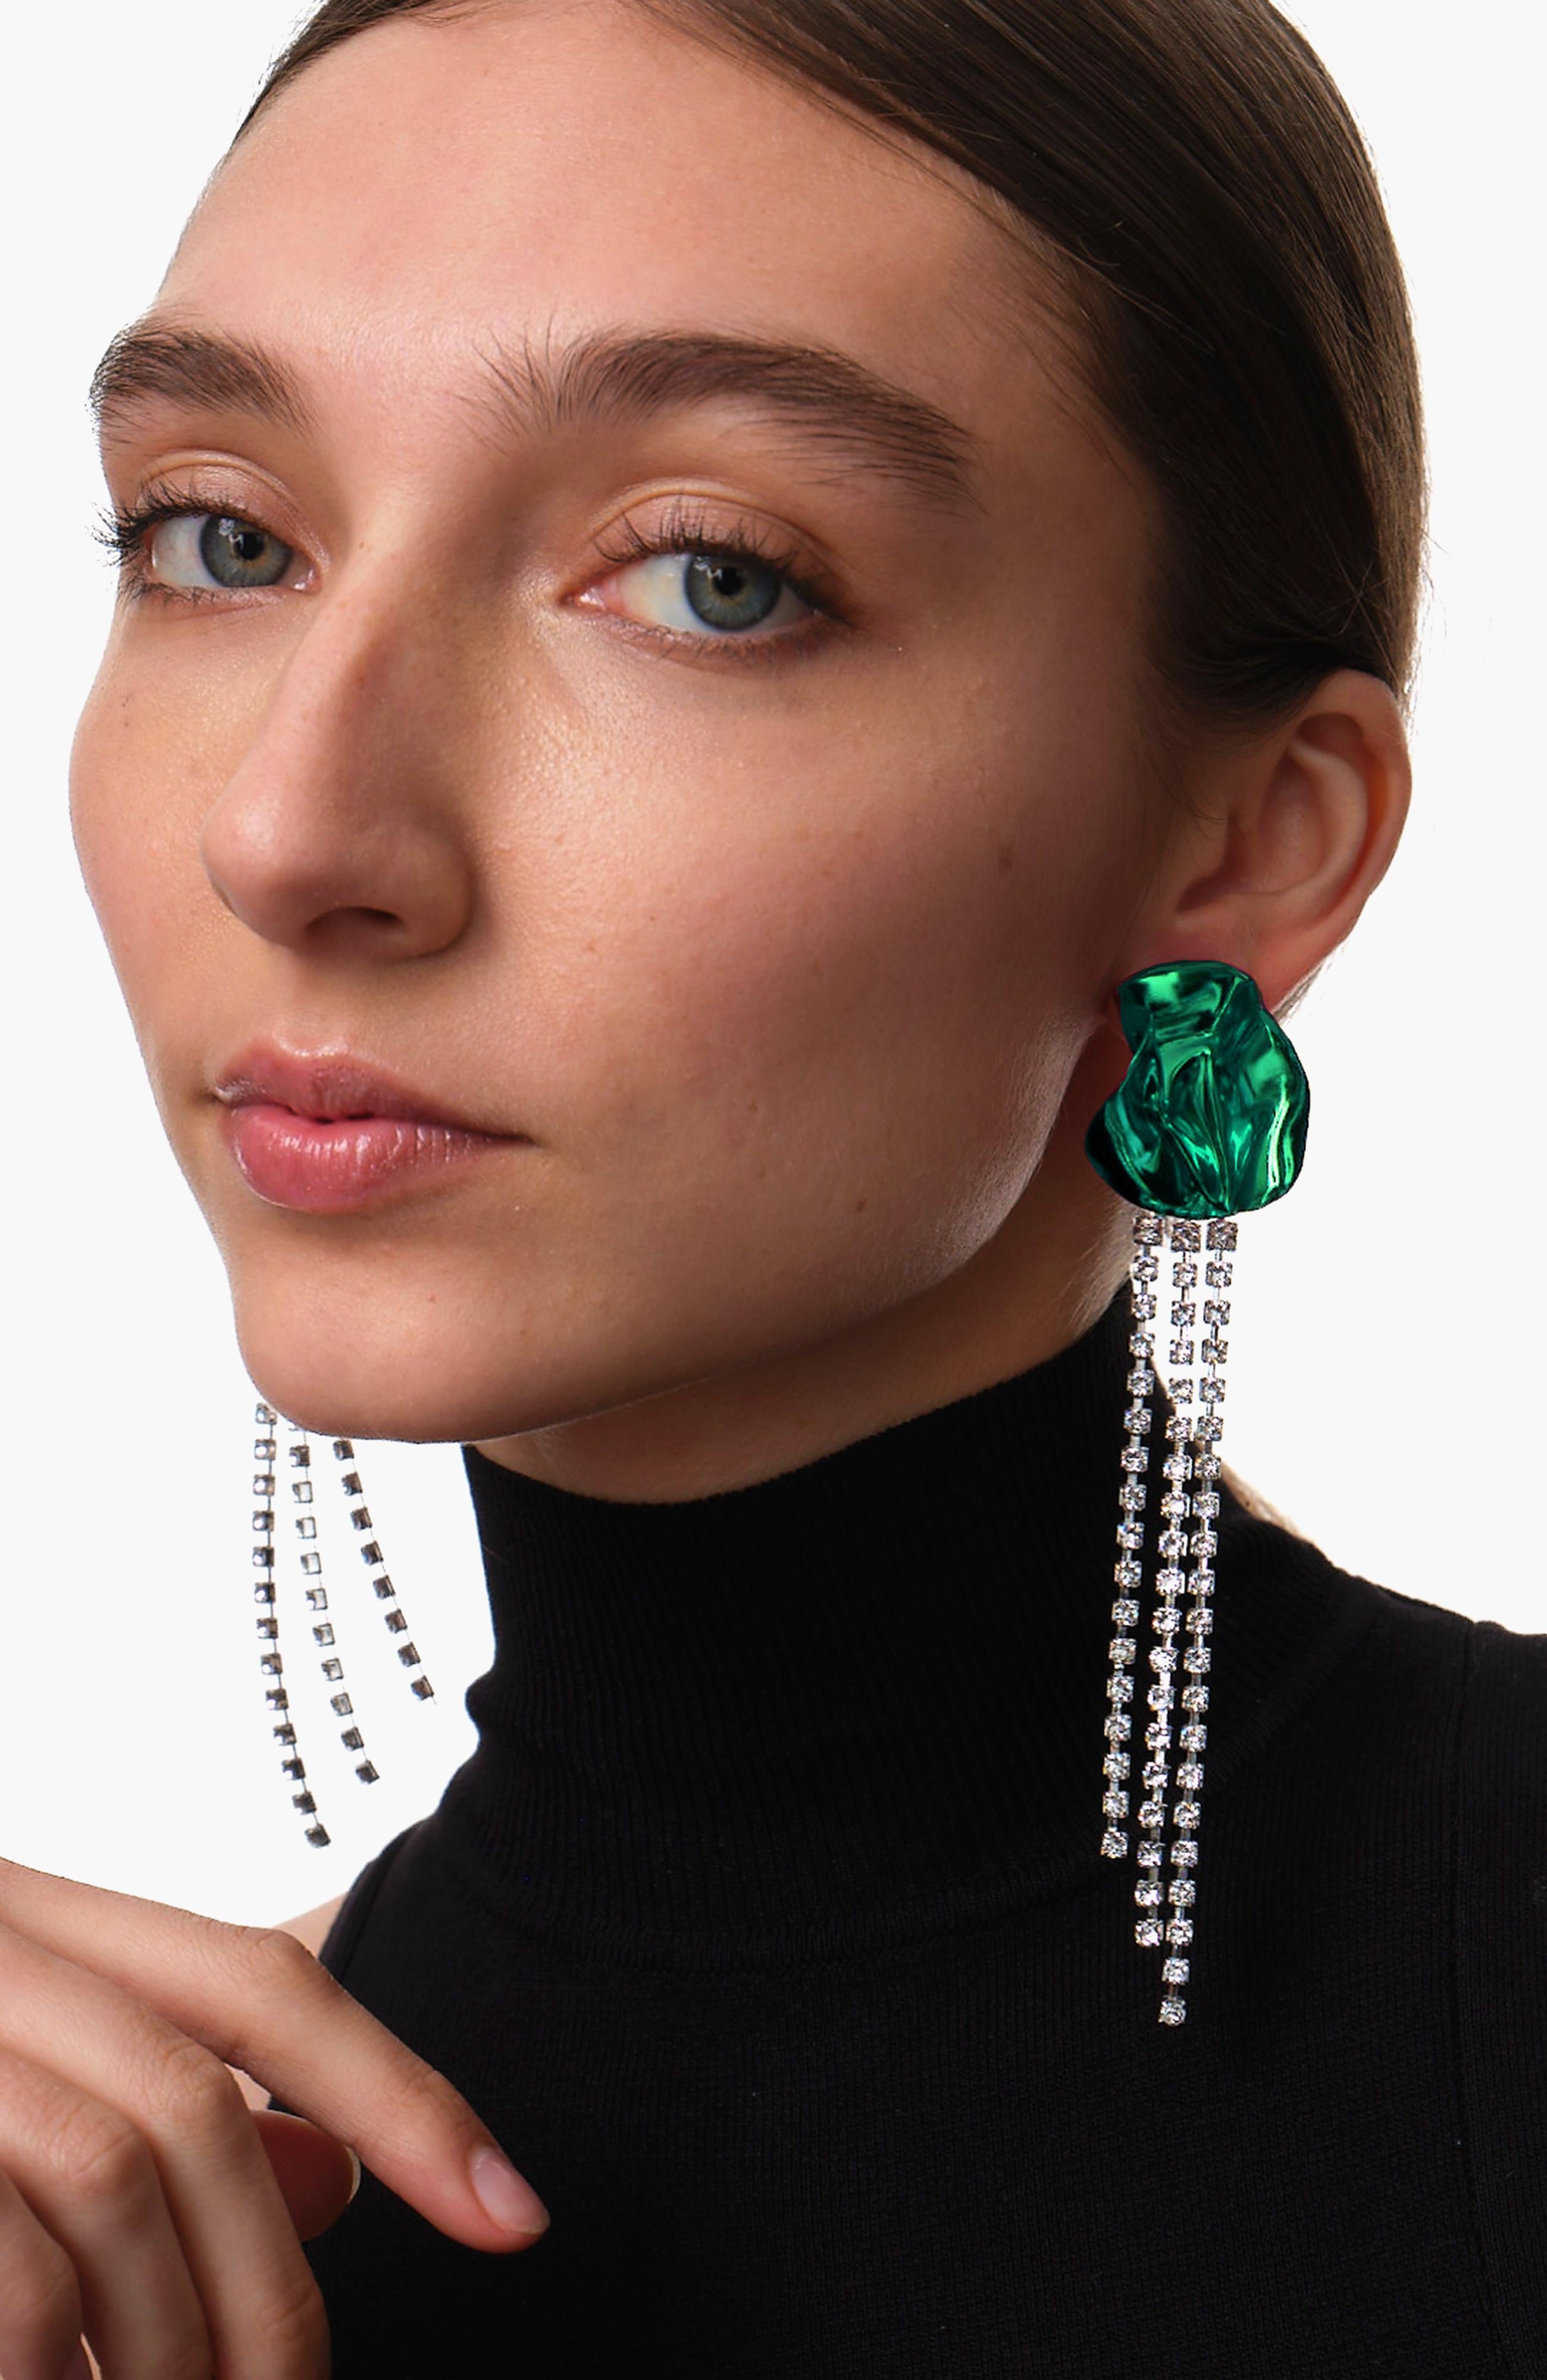 The Georgia crystal-embellished earrings from Sterling King feature a sculptural shape embellished with cascading clear crystals. Inspired by the works of Georgia O'Keeffe, these floral-inspired earrings are finished with vibrant green ceramic